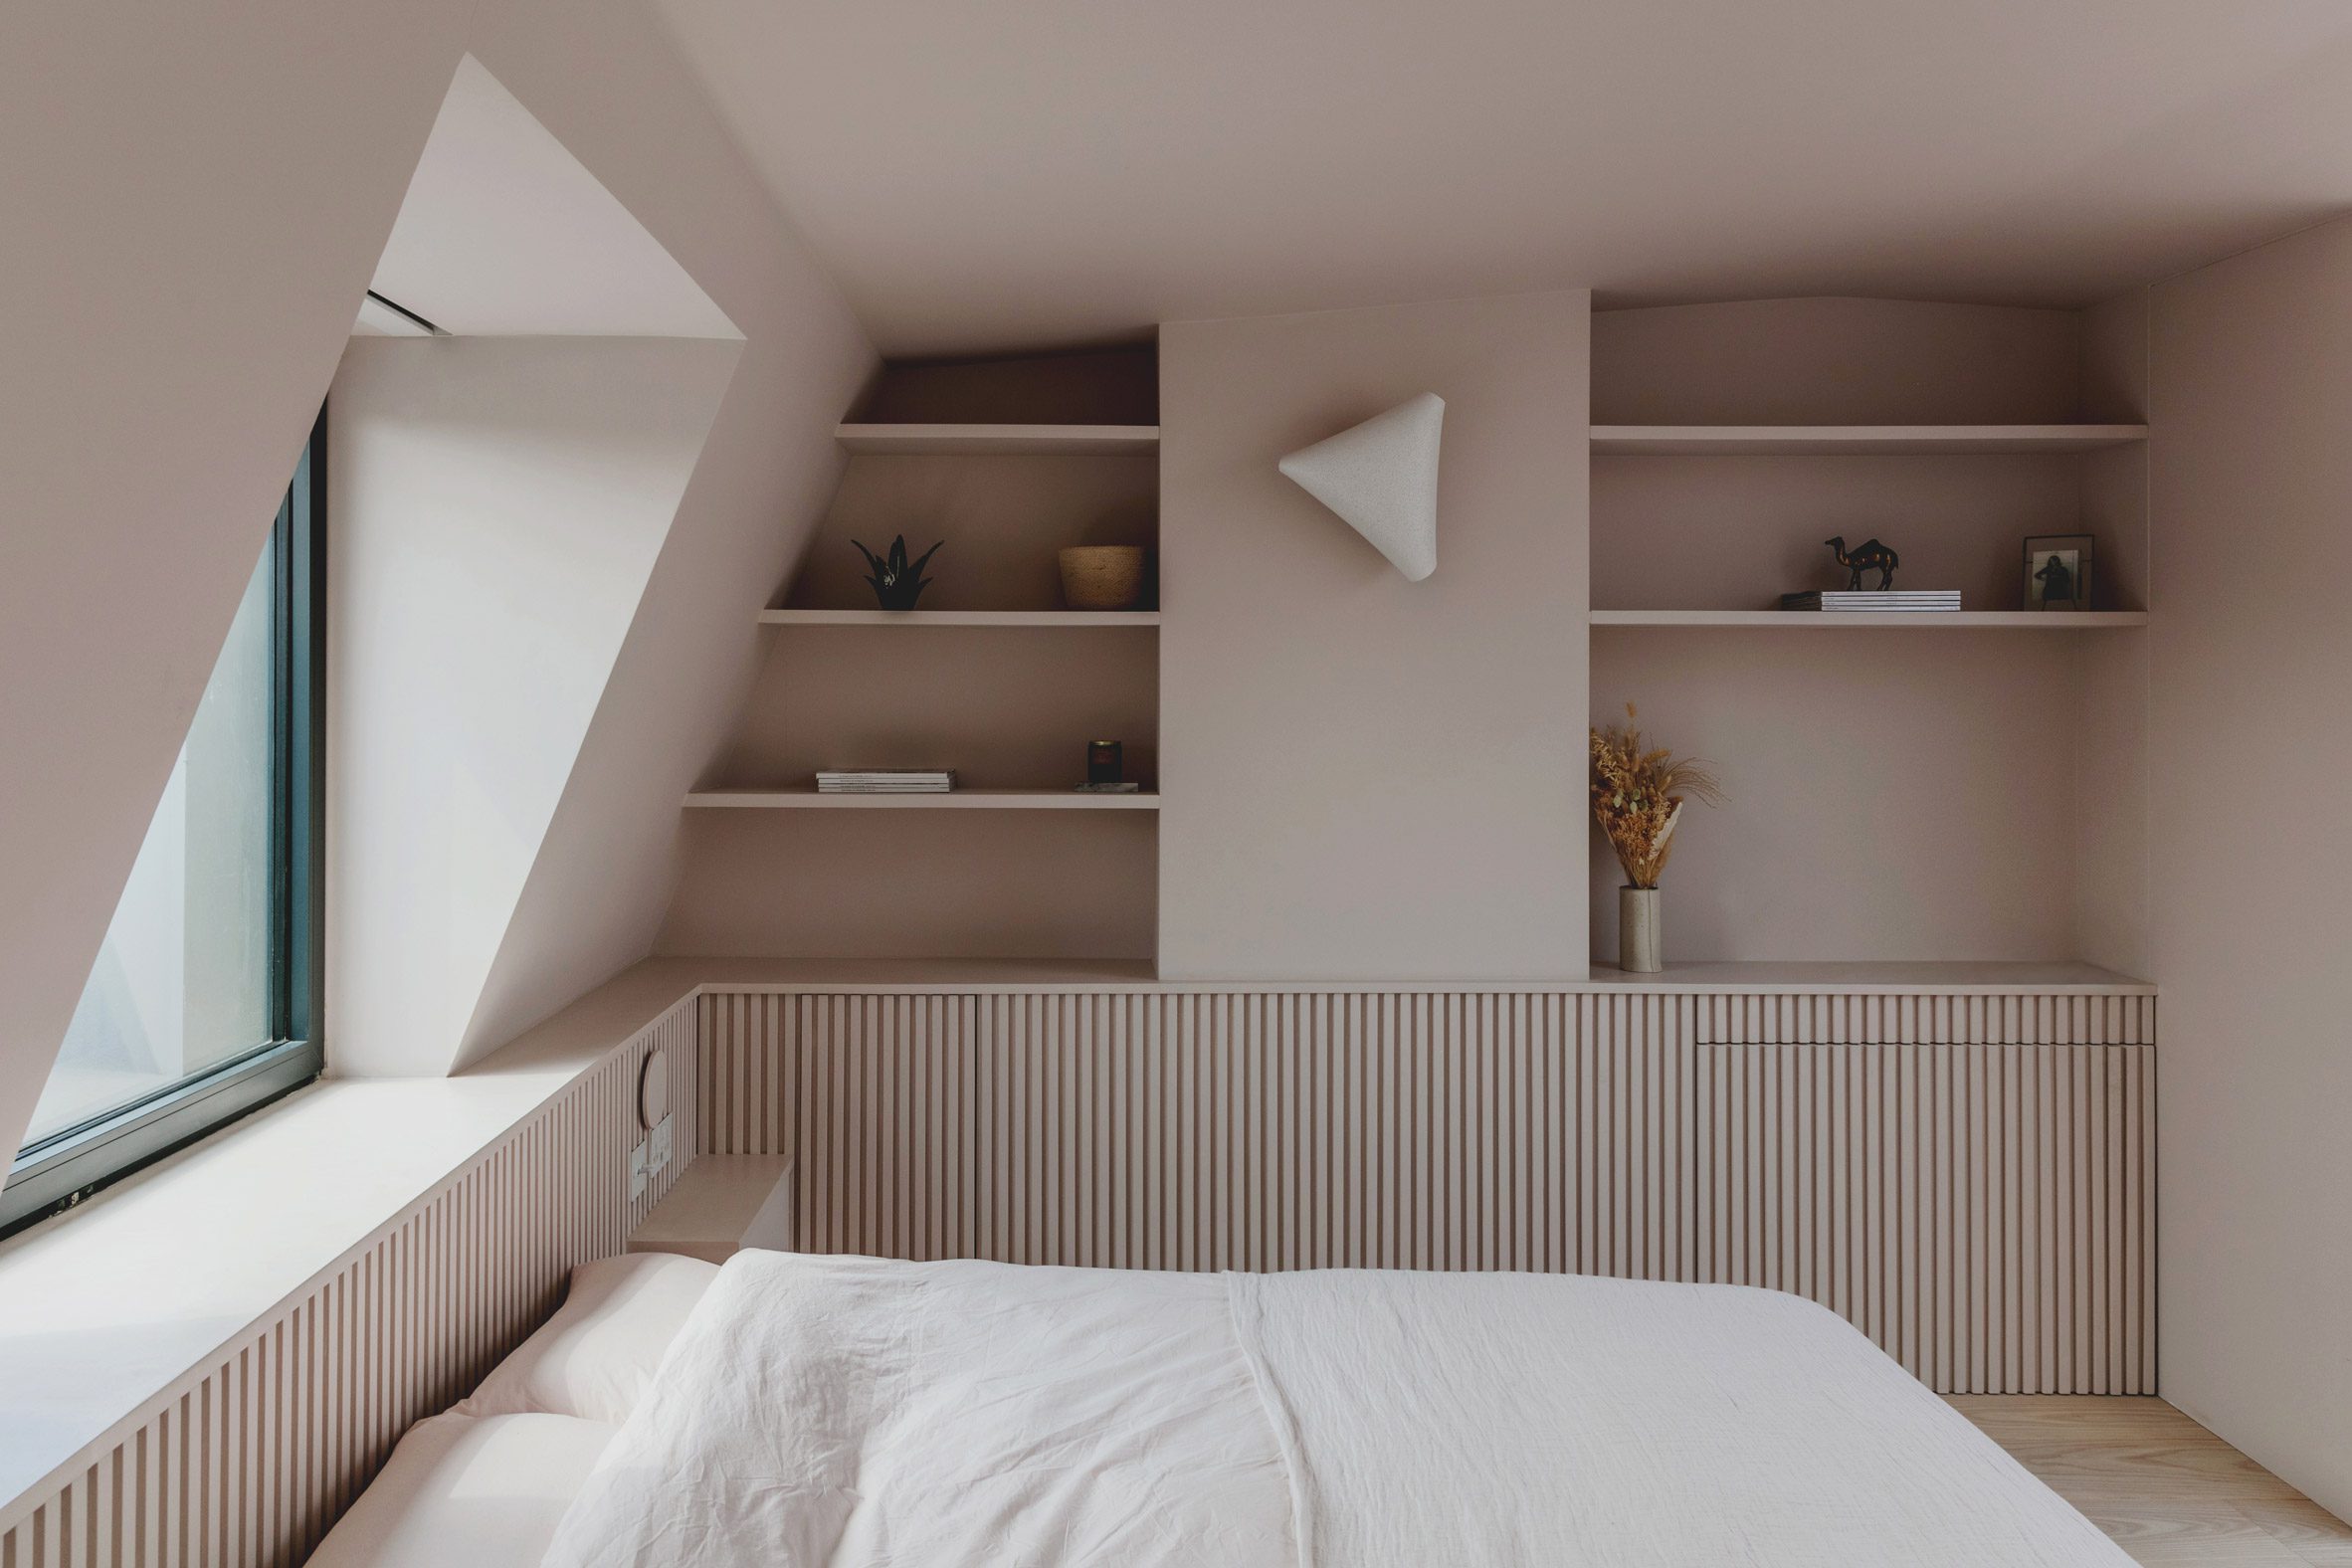 Bed and window in Narford Road loft extension by Emil Eve Architects